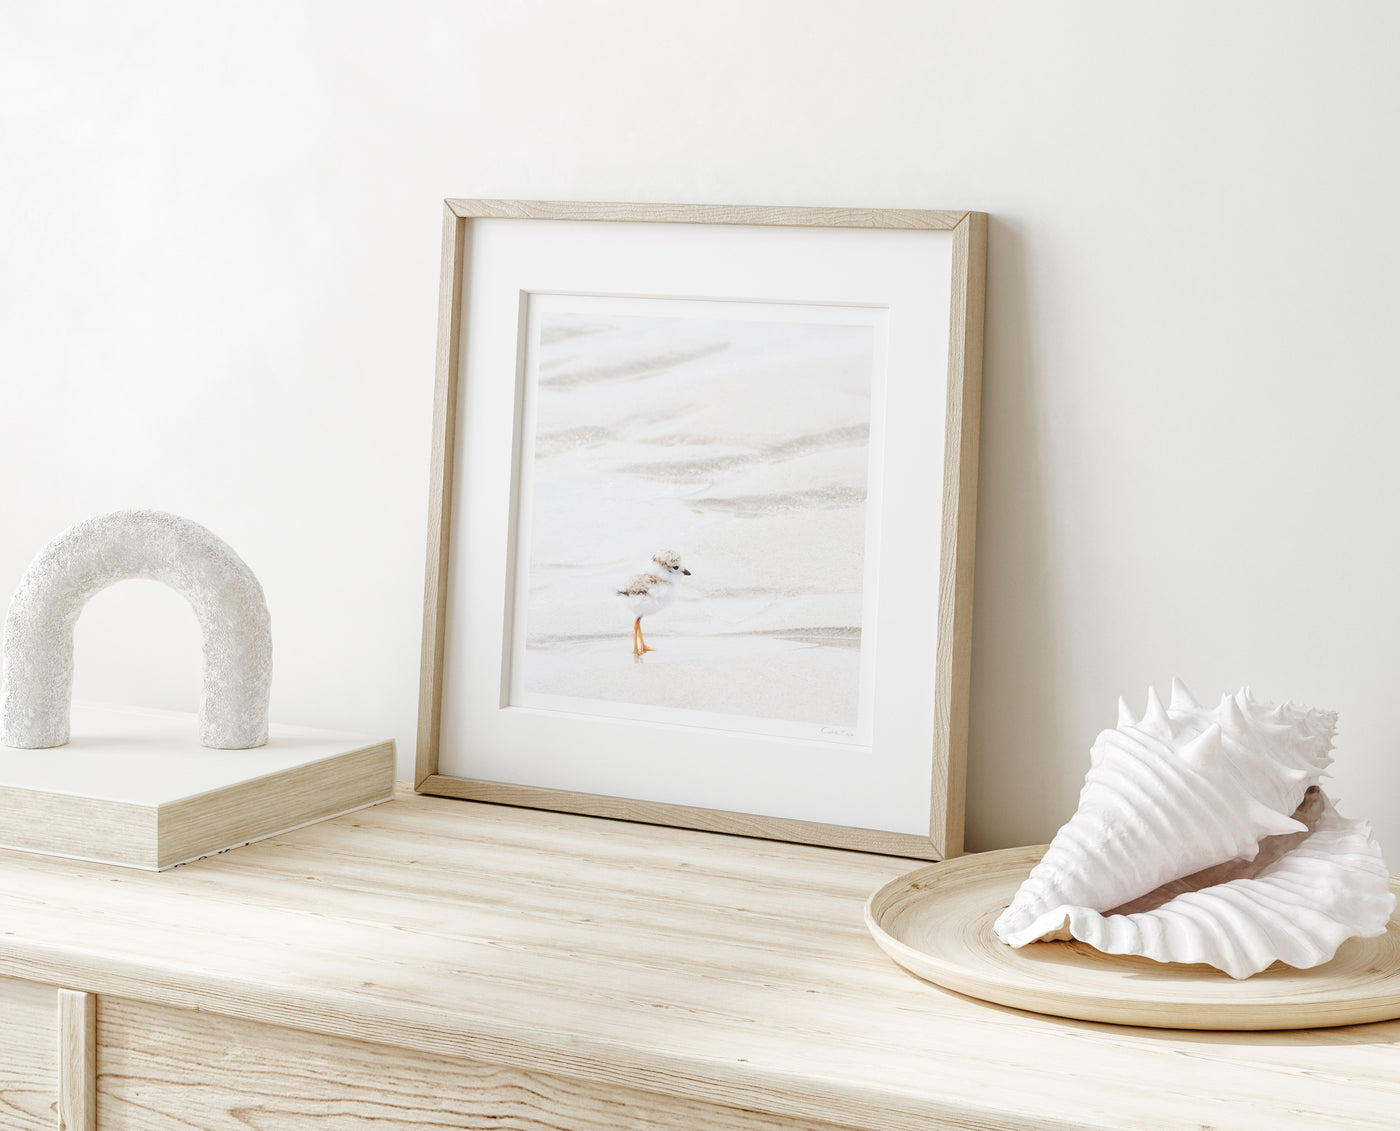 Piping Plover Chick No 3 - Framed shorebird art print by Cattie Coyle Photography on dresser